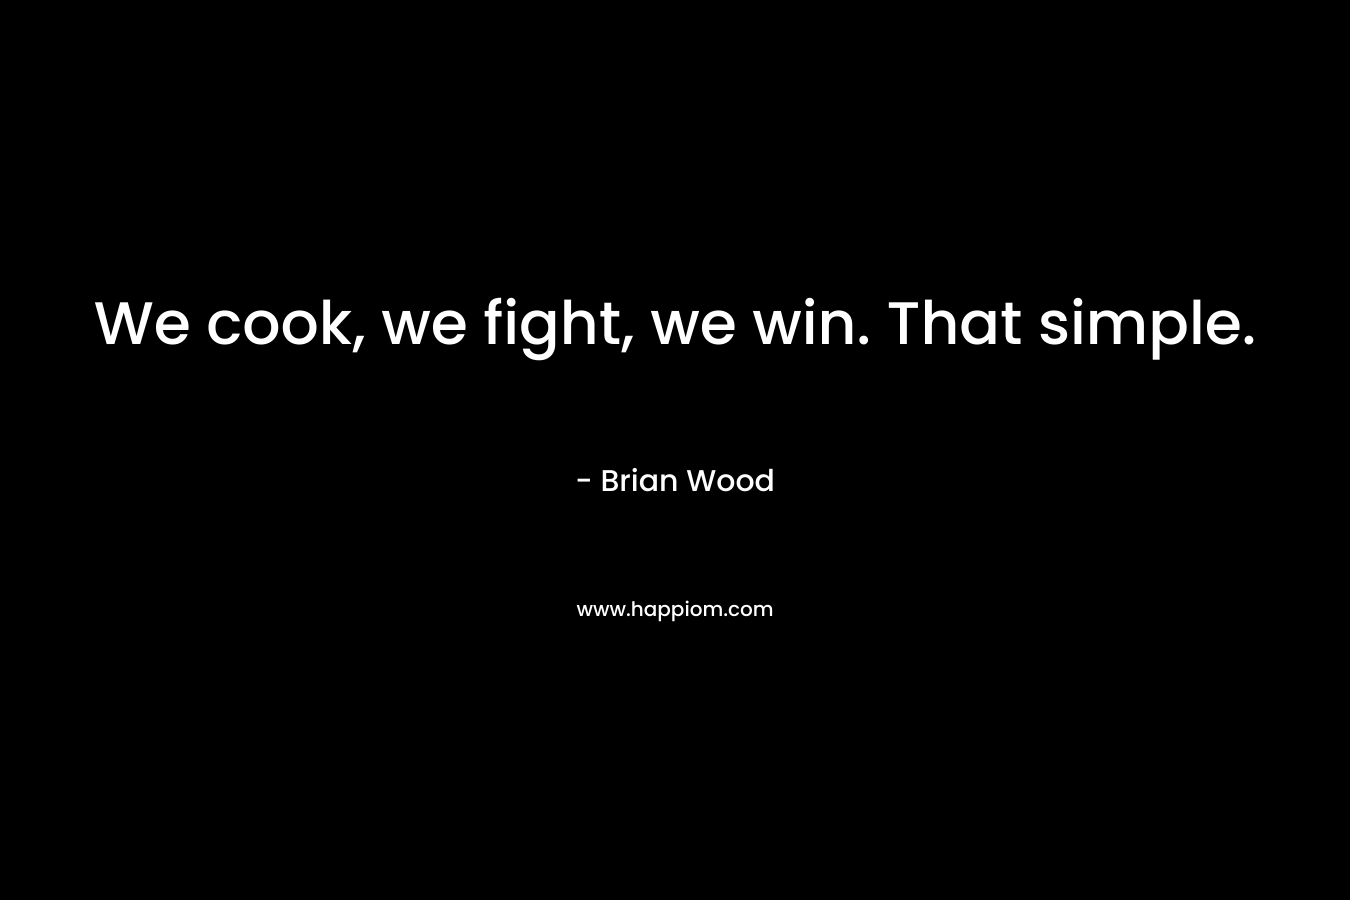 We cook, we fight, we win. That simple. – Brian Wood